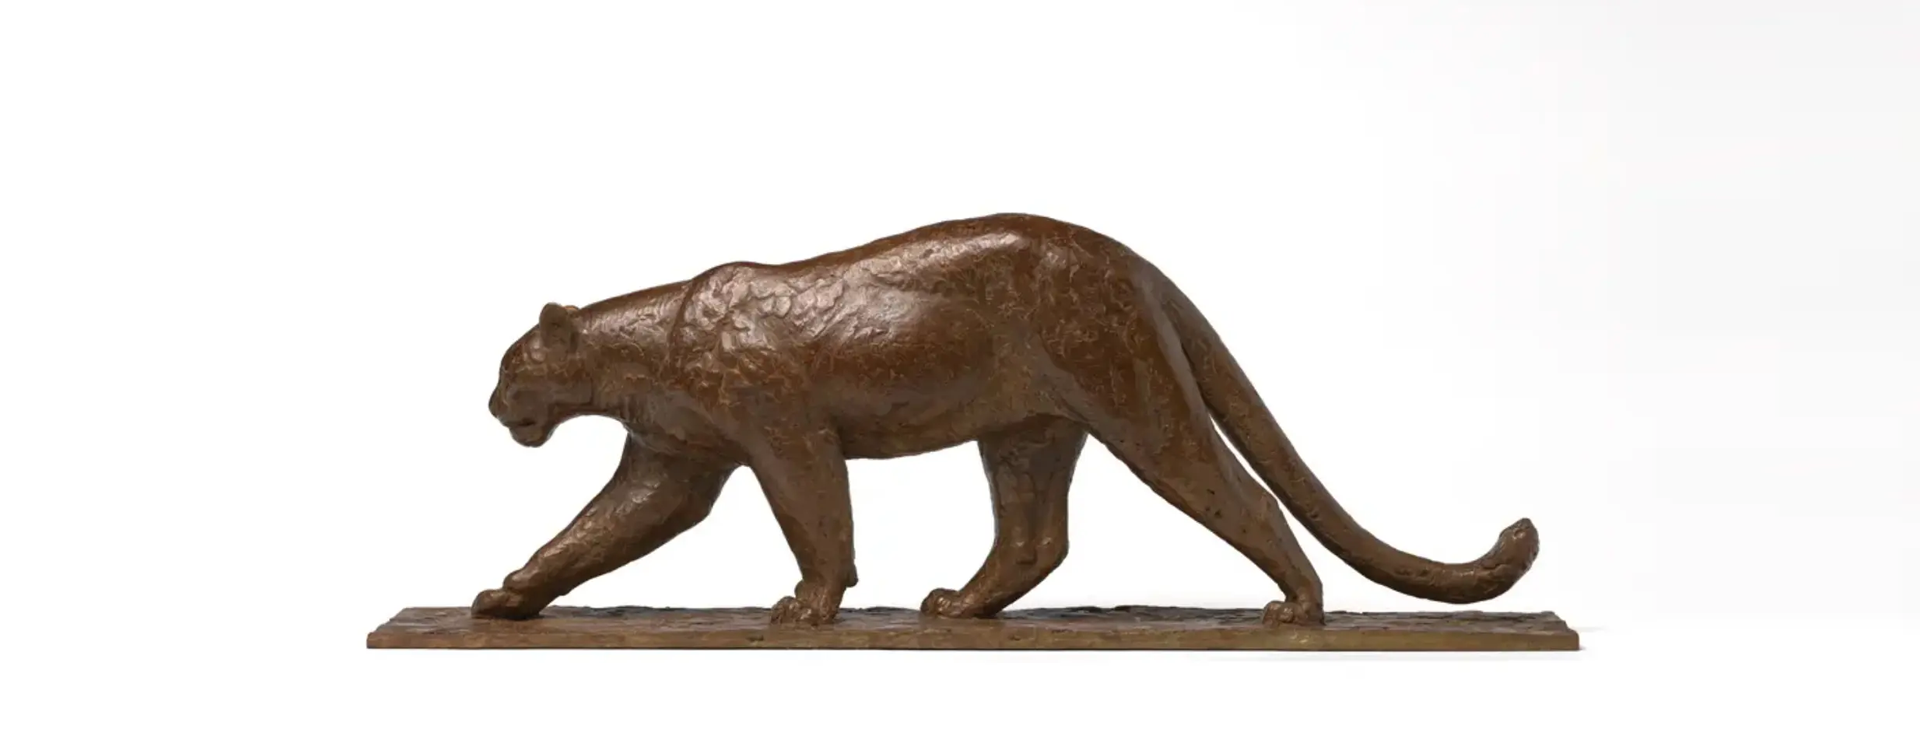 A bear statue is shown in bronze.